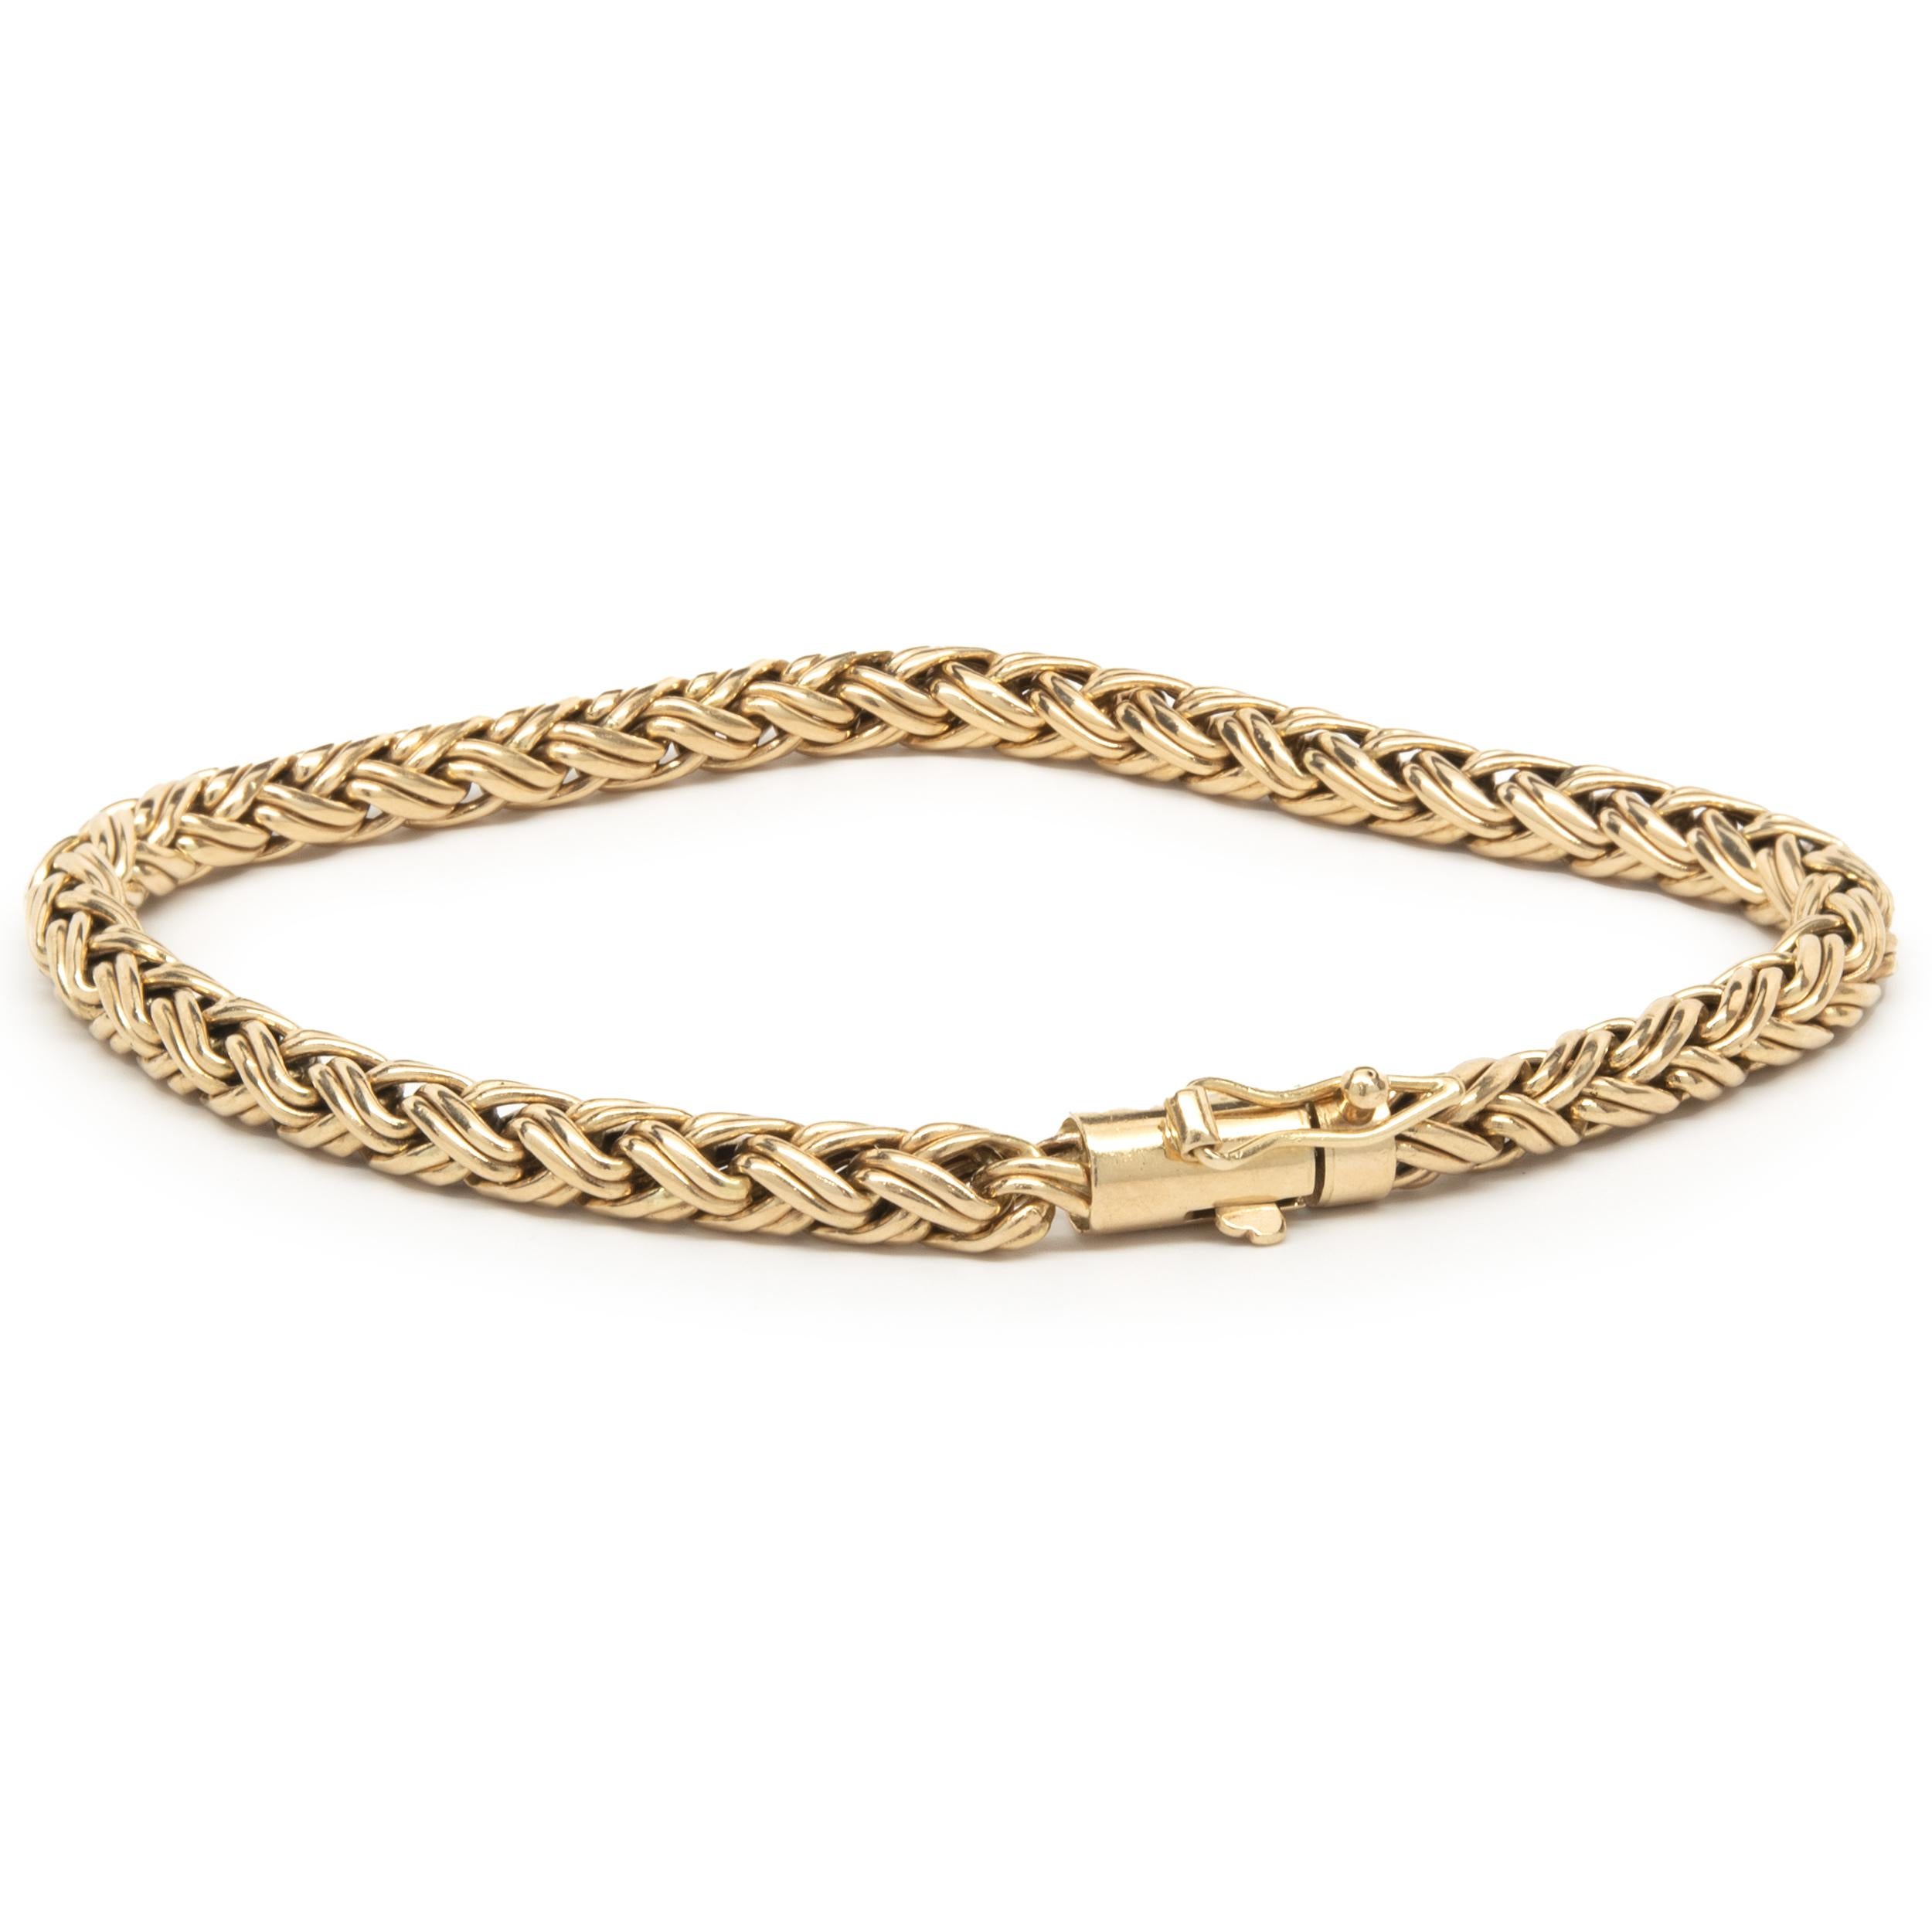 Material: 14K yellow gold
Dimensions: bracelet will fit up to a 7-inch wrist
Weight: 9.86 grams